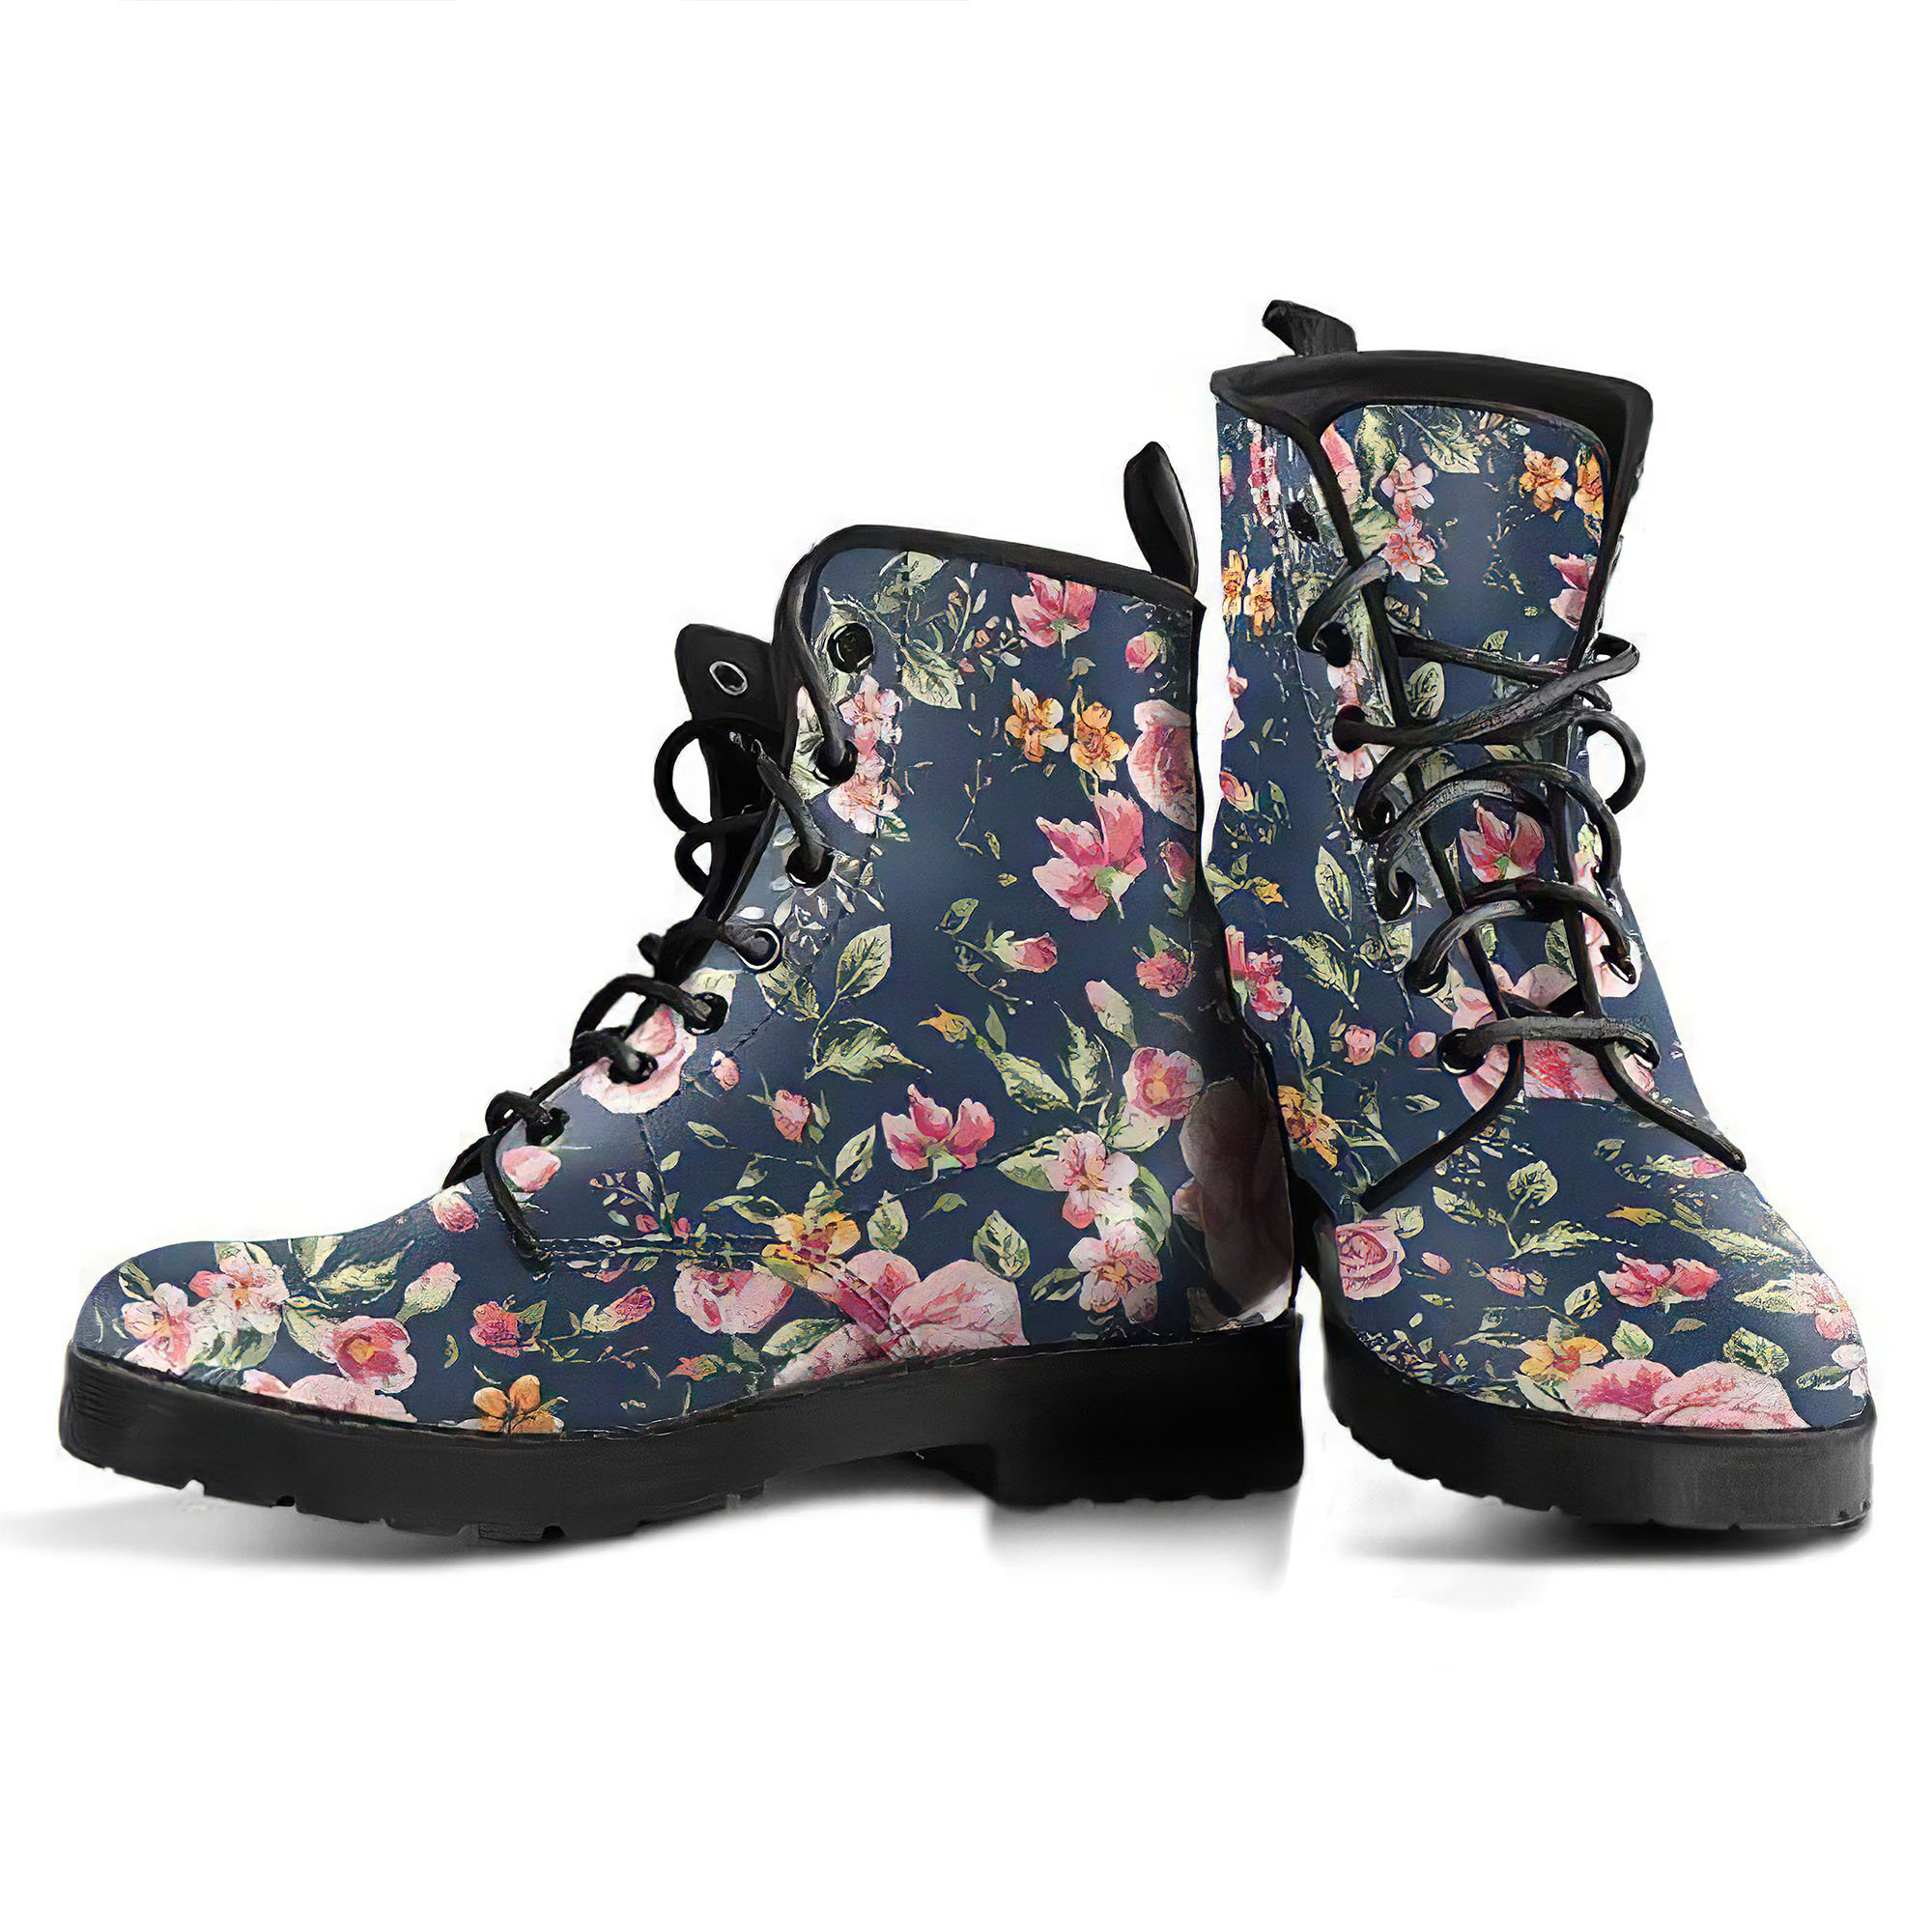 floral-pattern-2-handcrafted-boots-1-gp-main.jpg